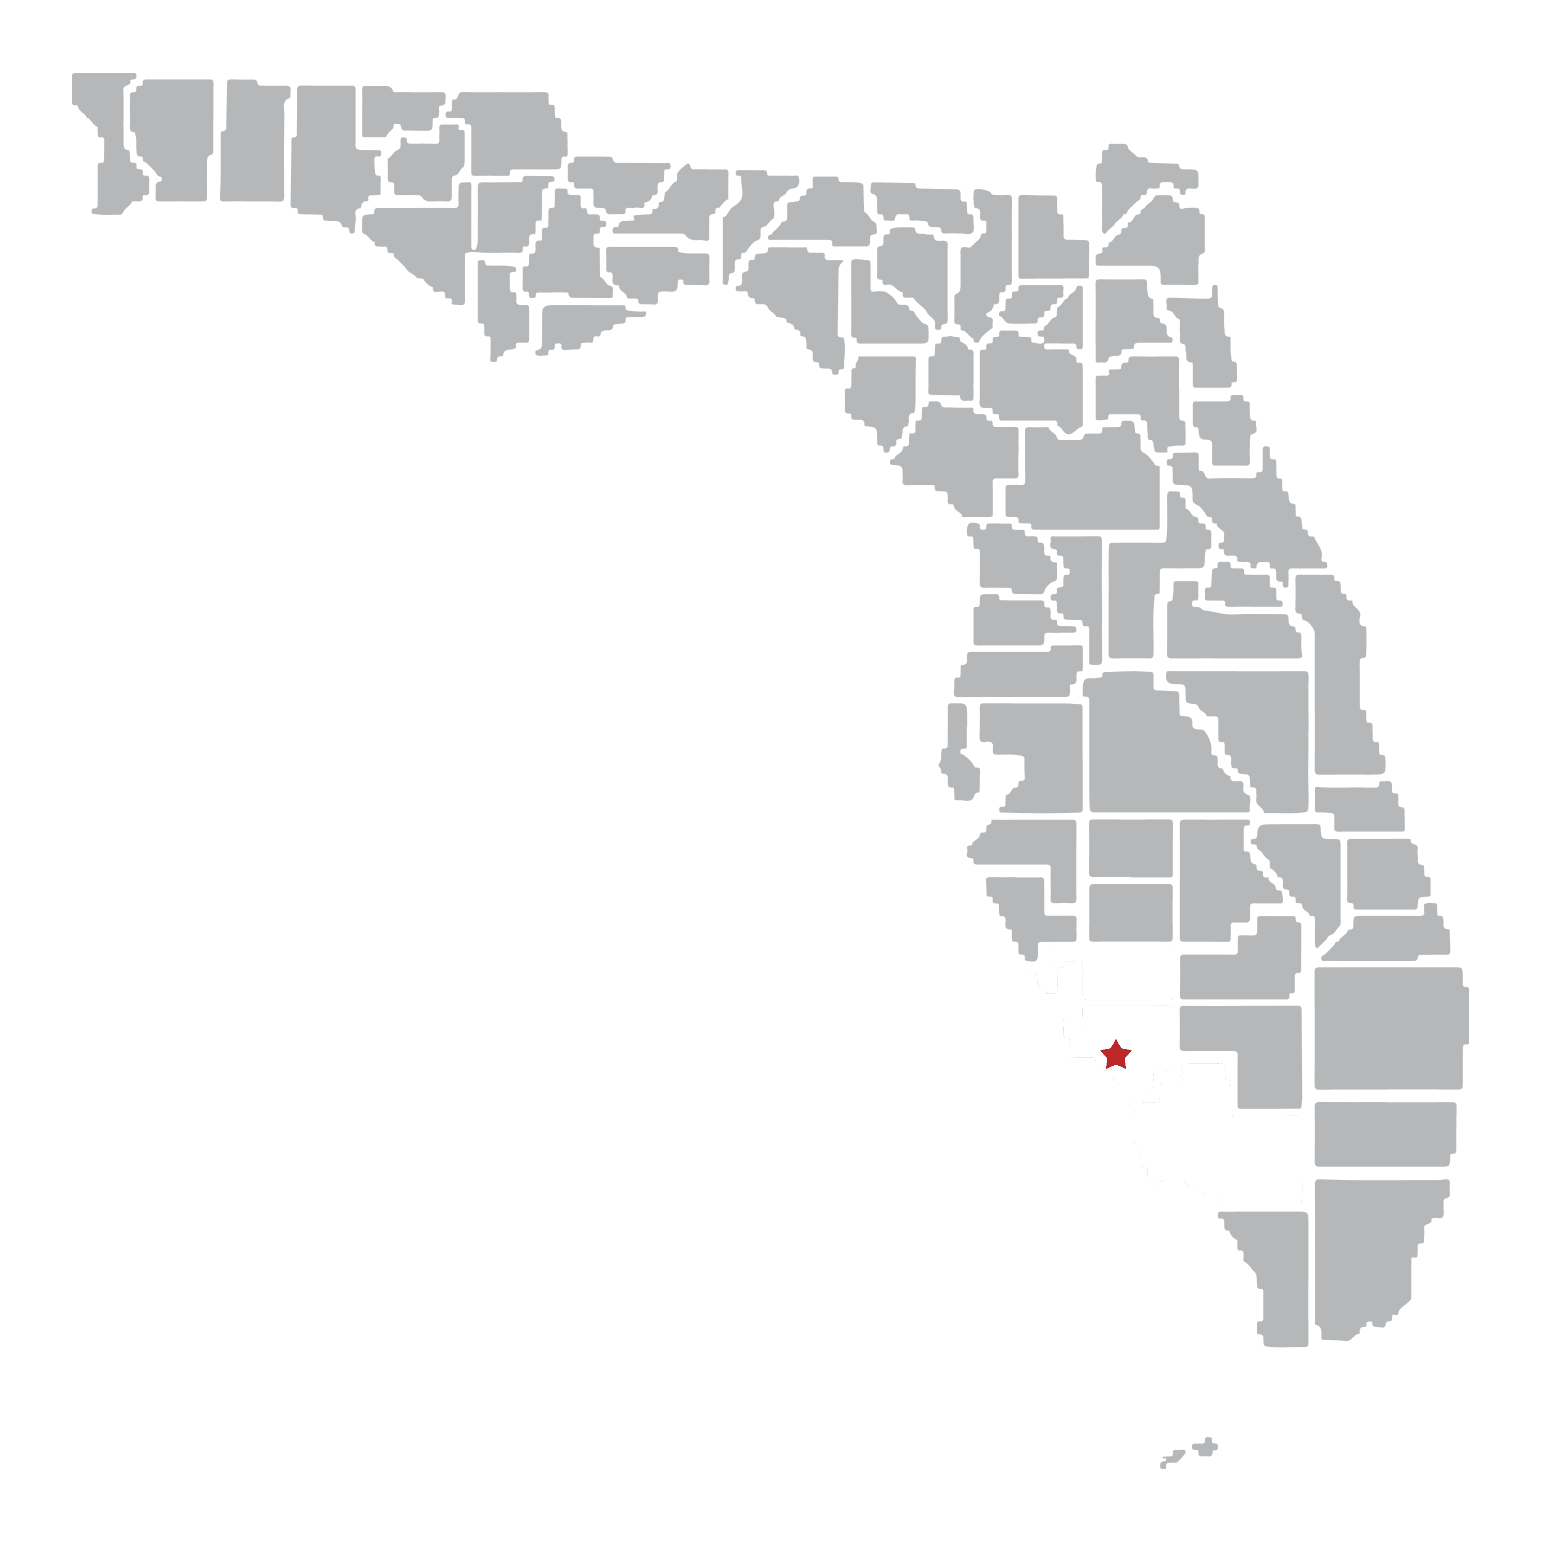 Lee and Collier County